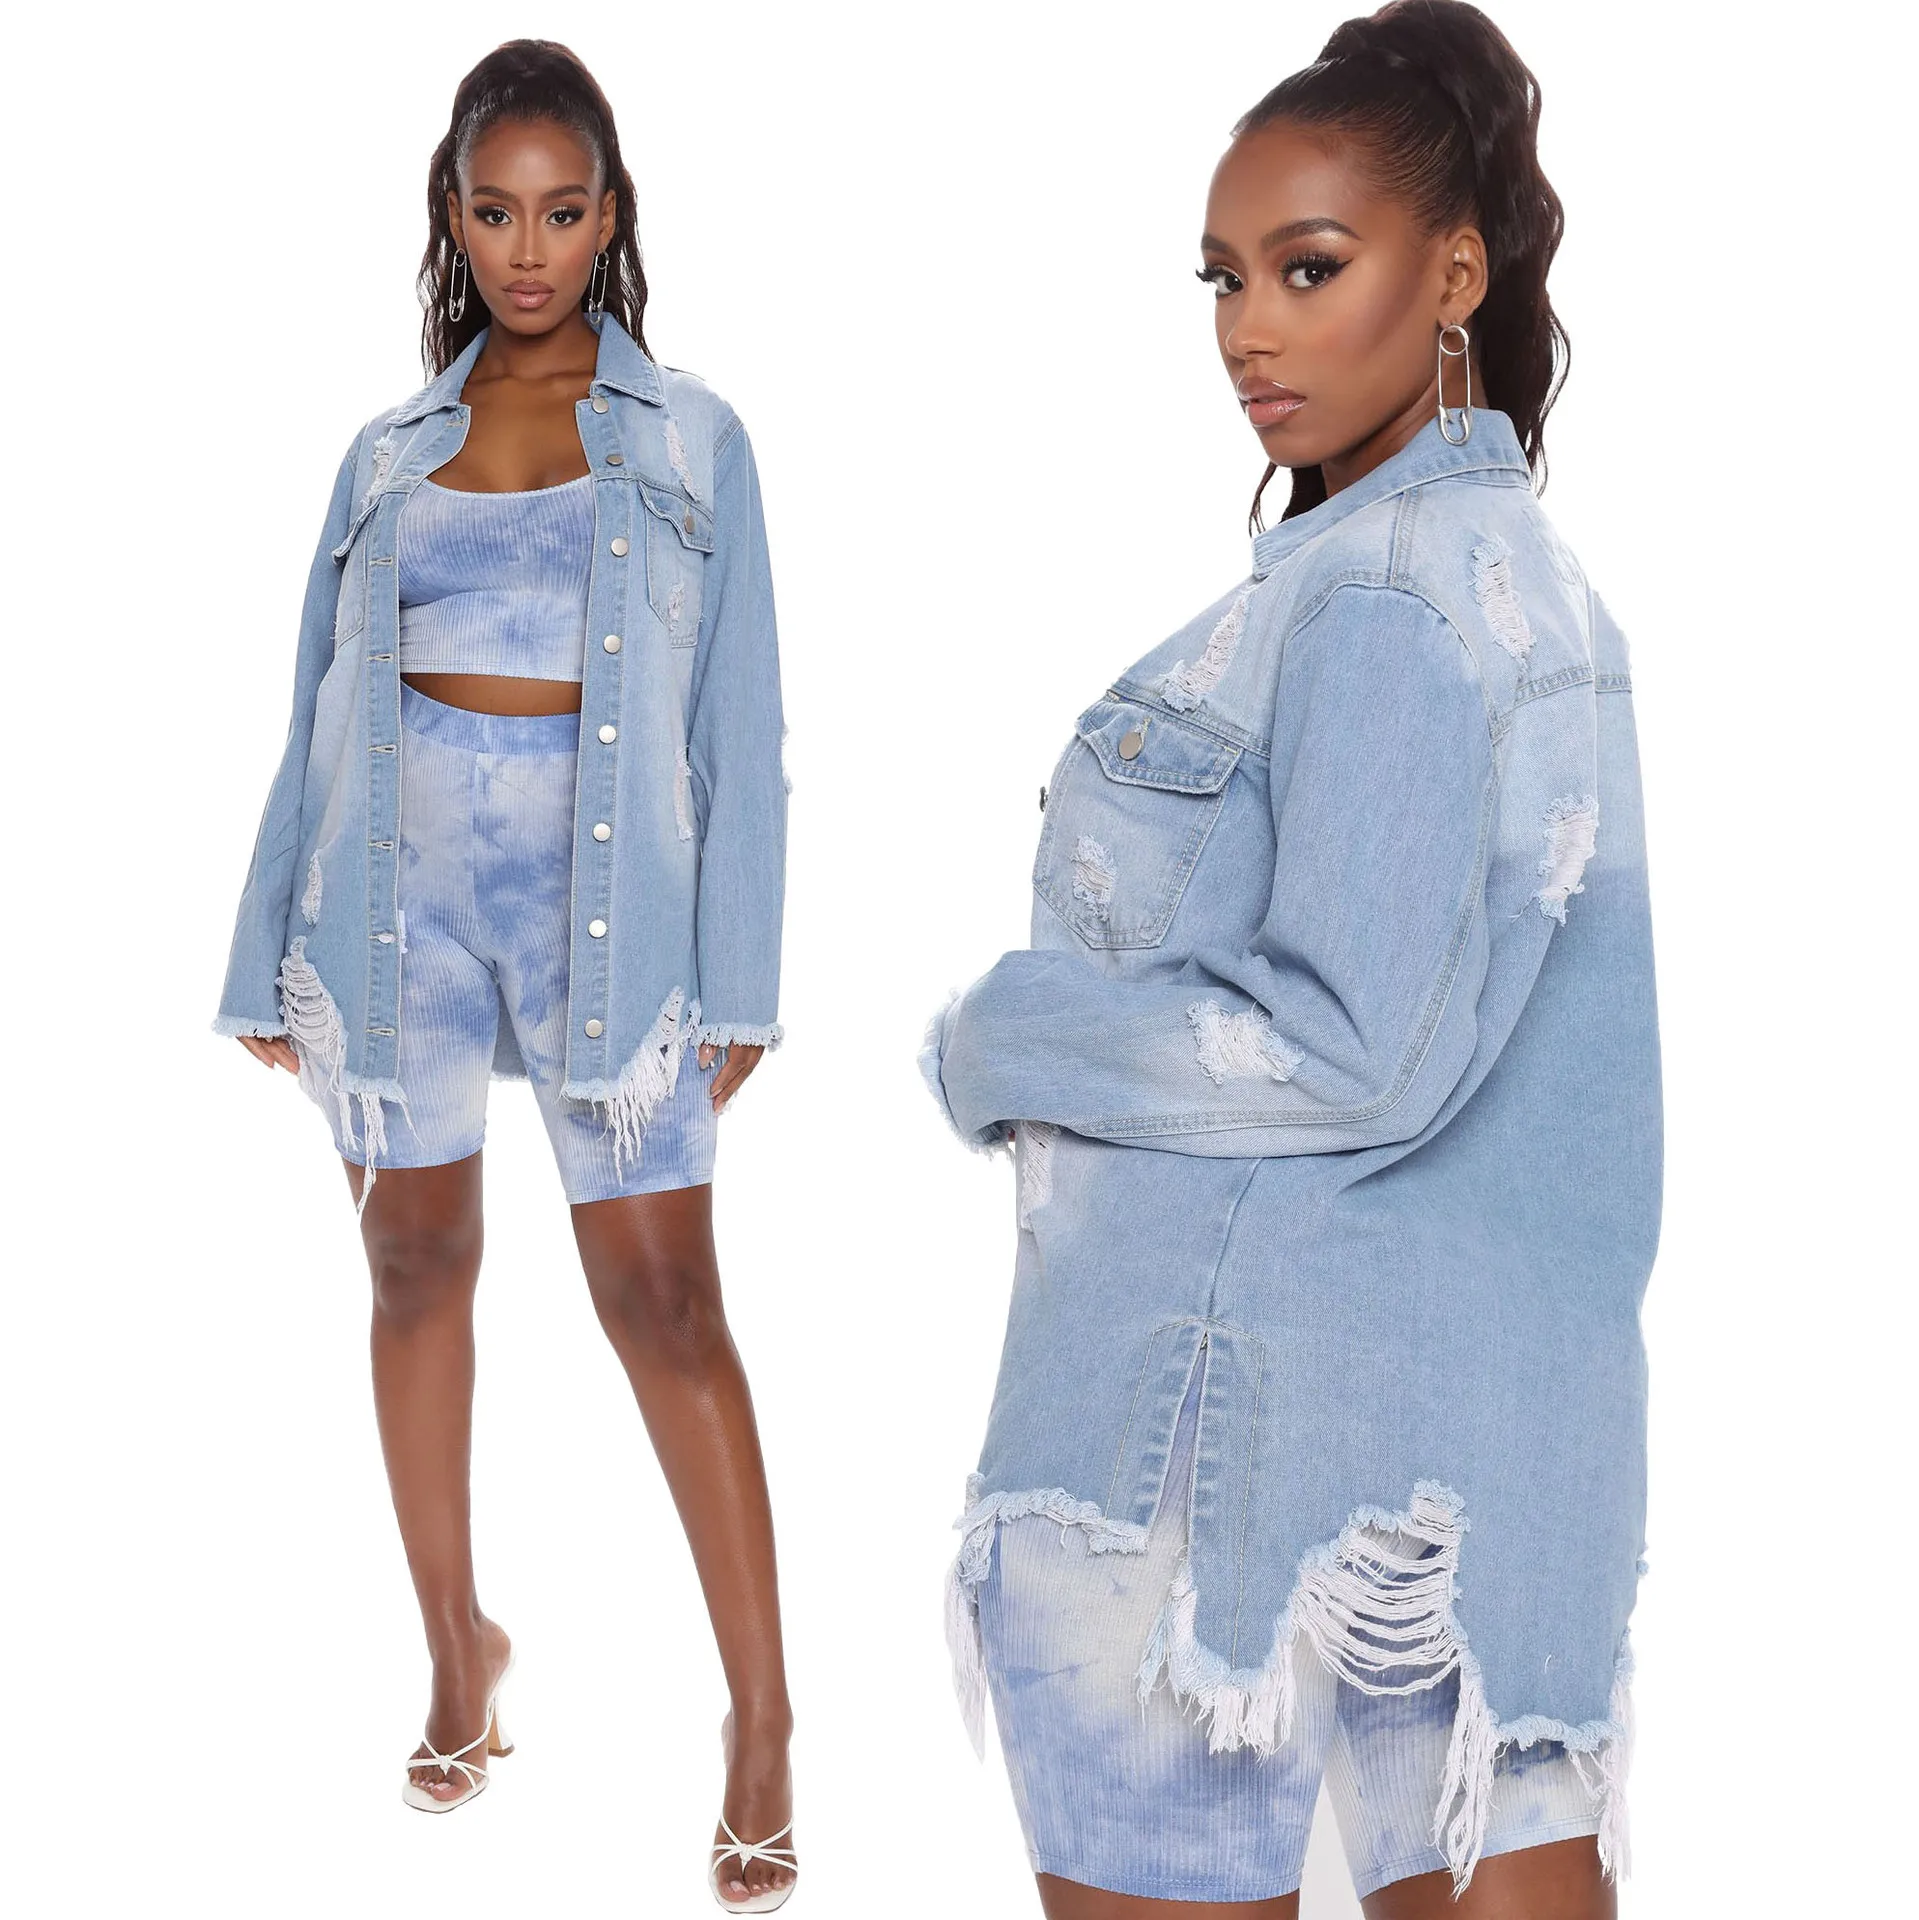 

FNOCE 2021 new spring women's ripped jeans jackets fashion trends casual solid long sleeve slim loose X-Long denim coats